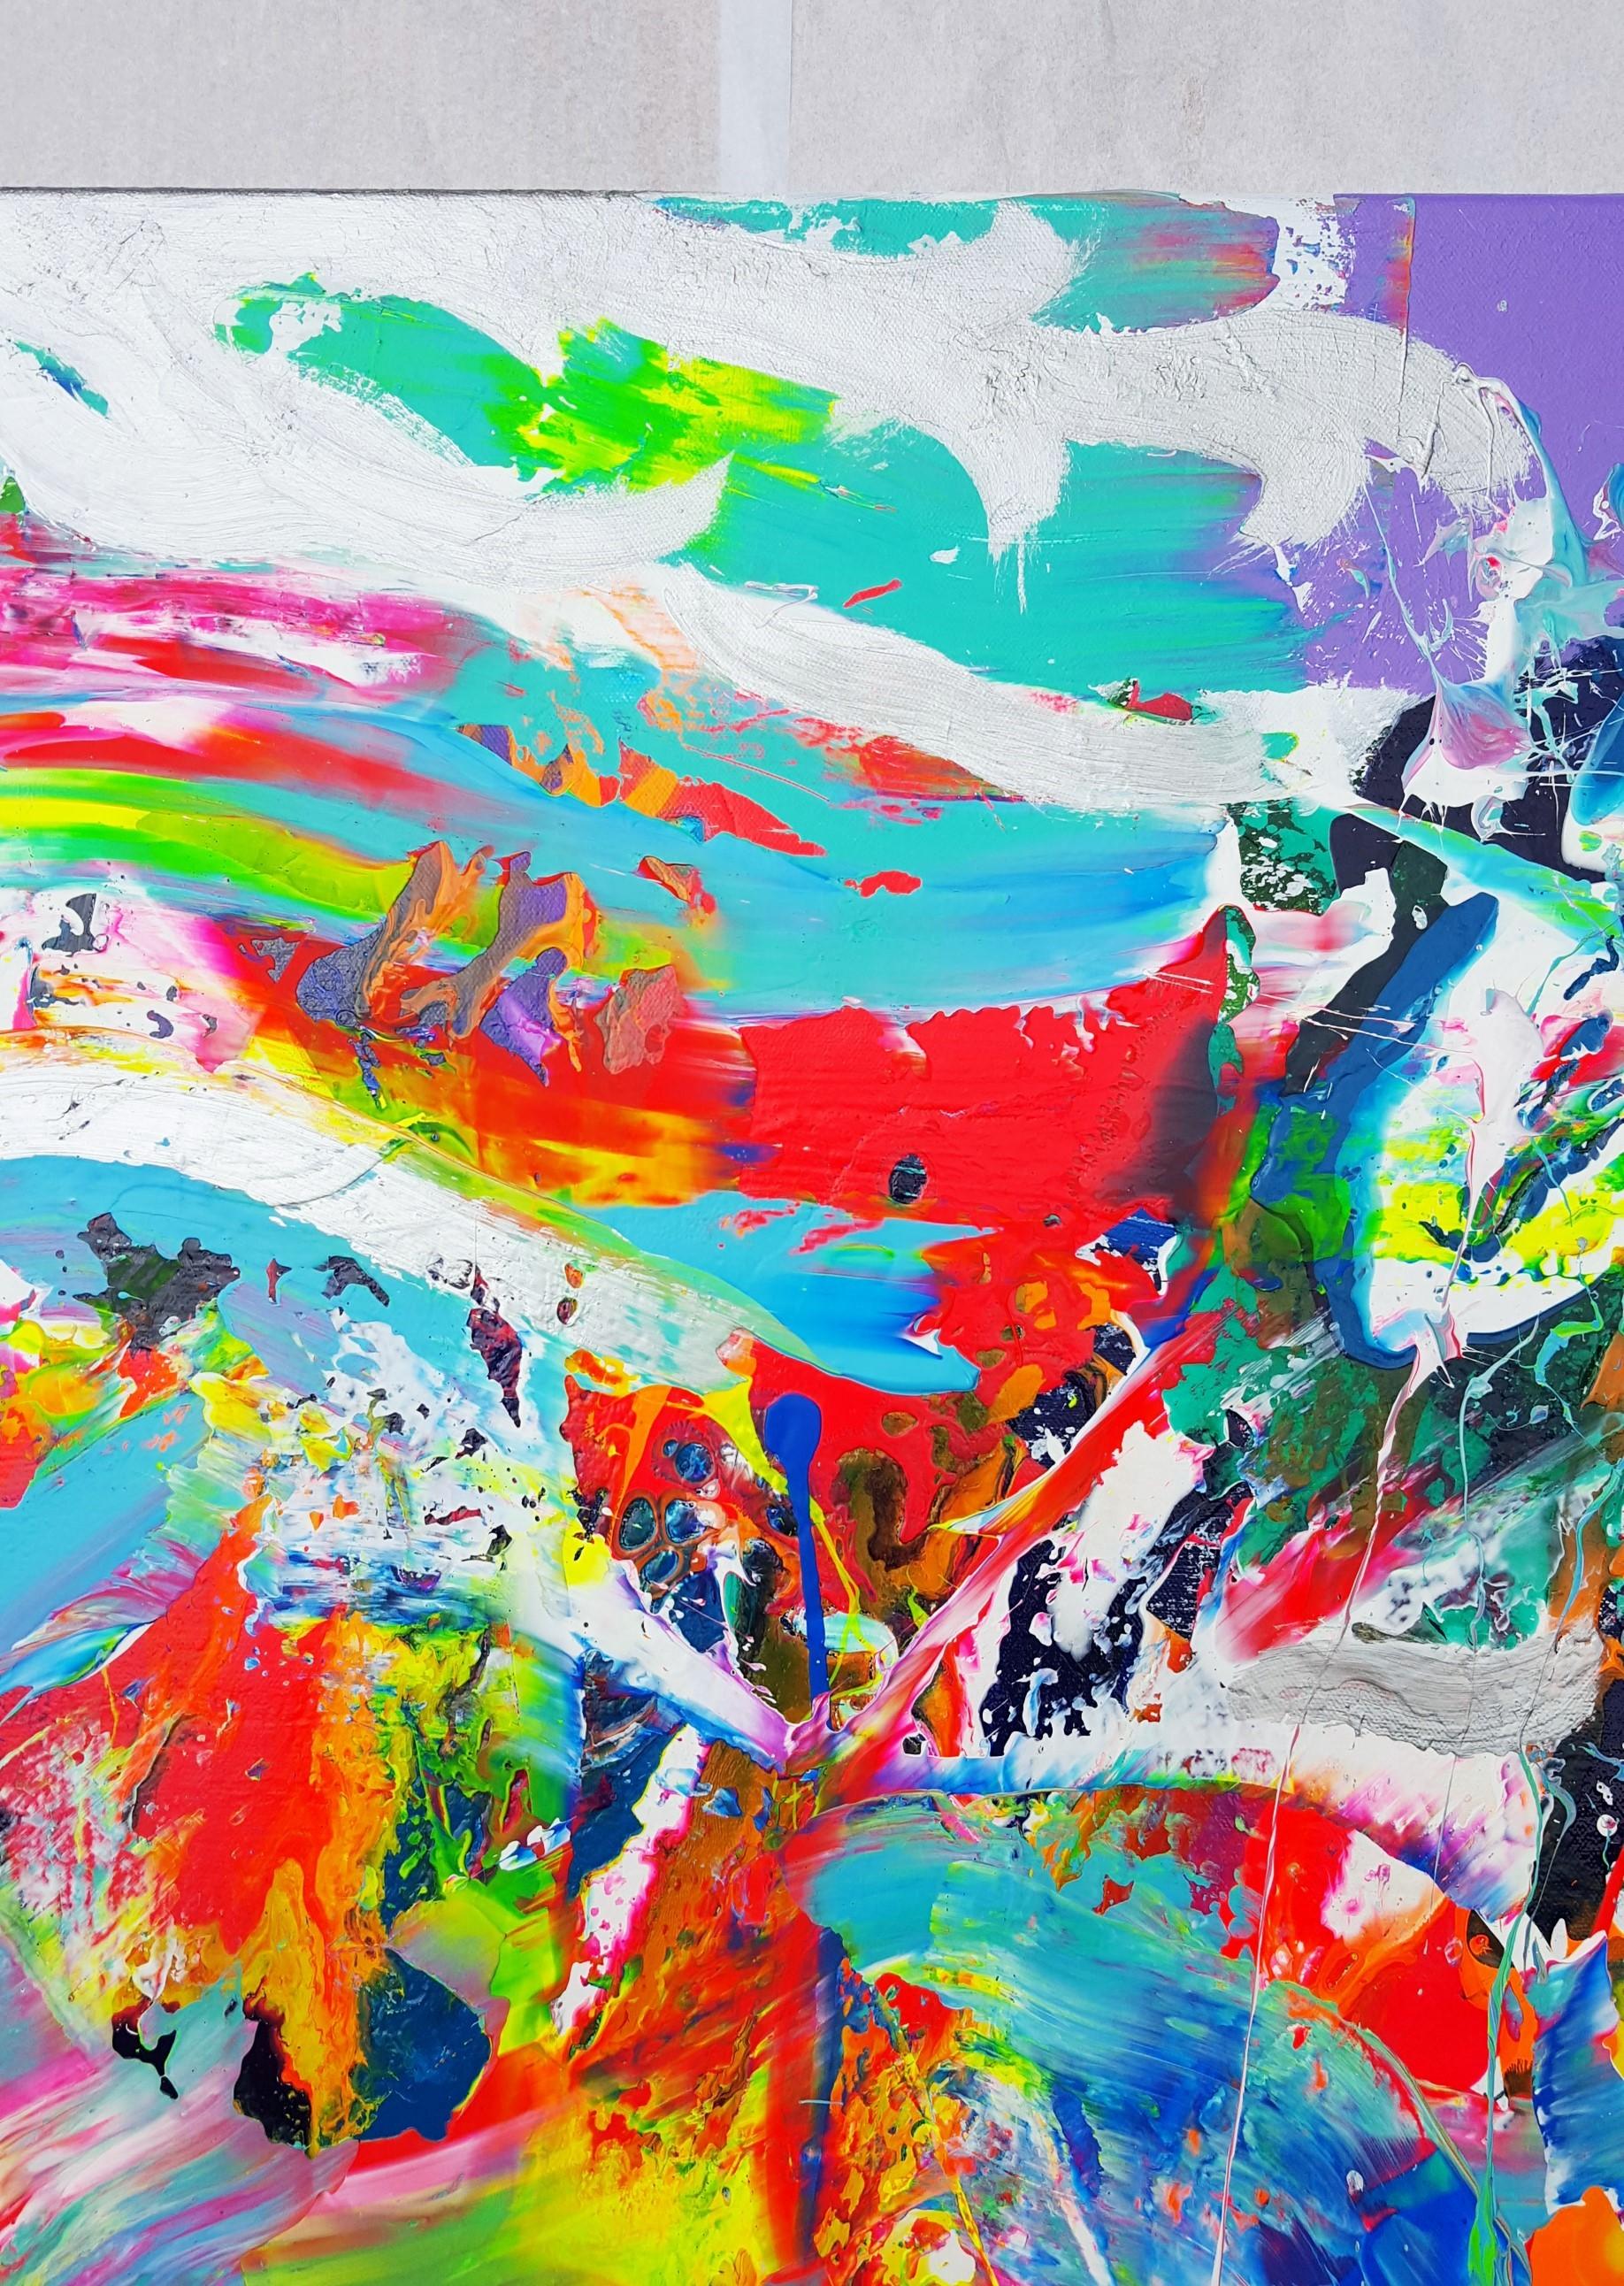 Tsunami Samurai - Abstract Expressionist Painting by Jack Graves III